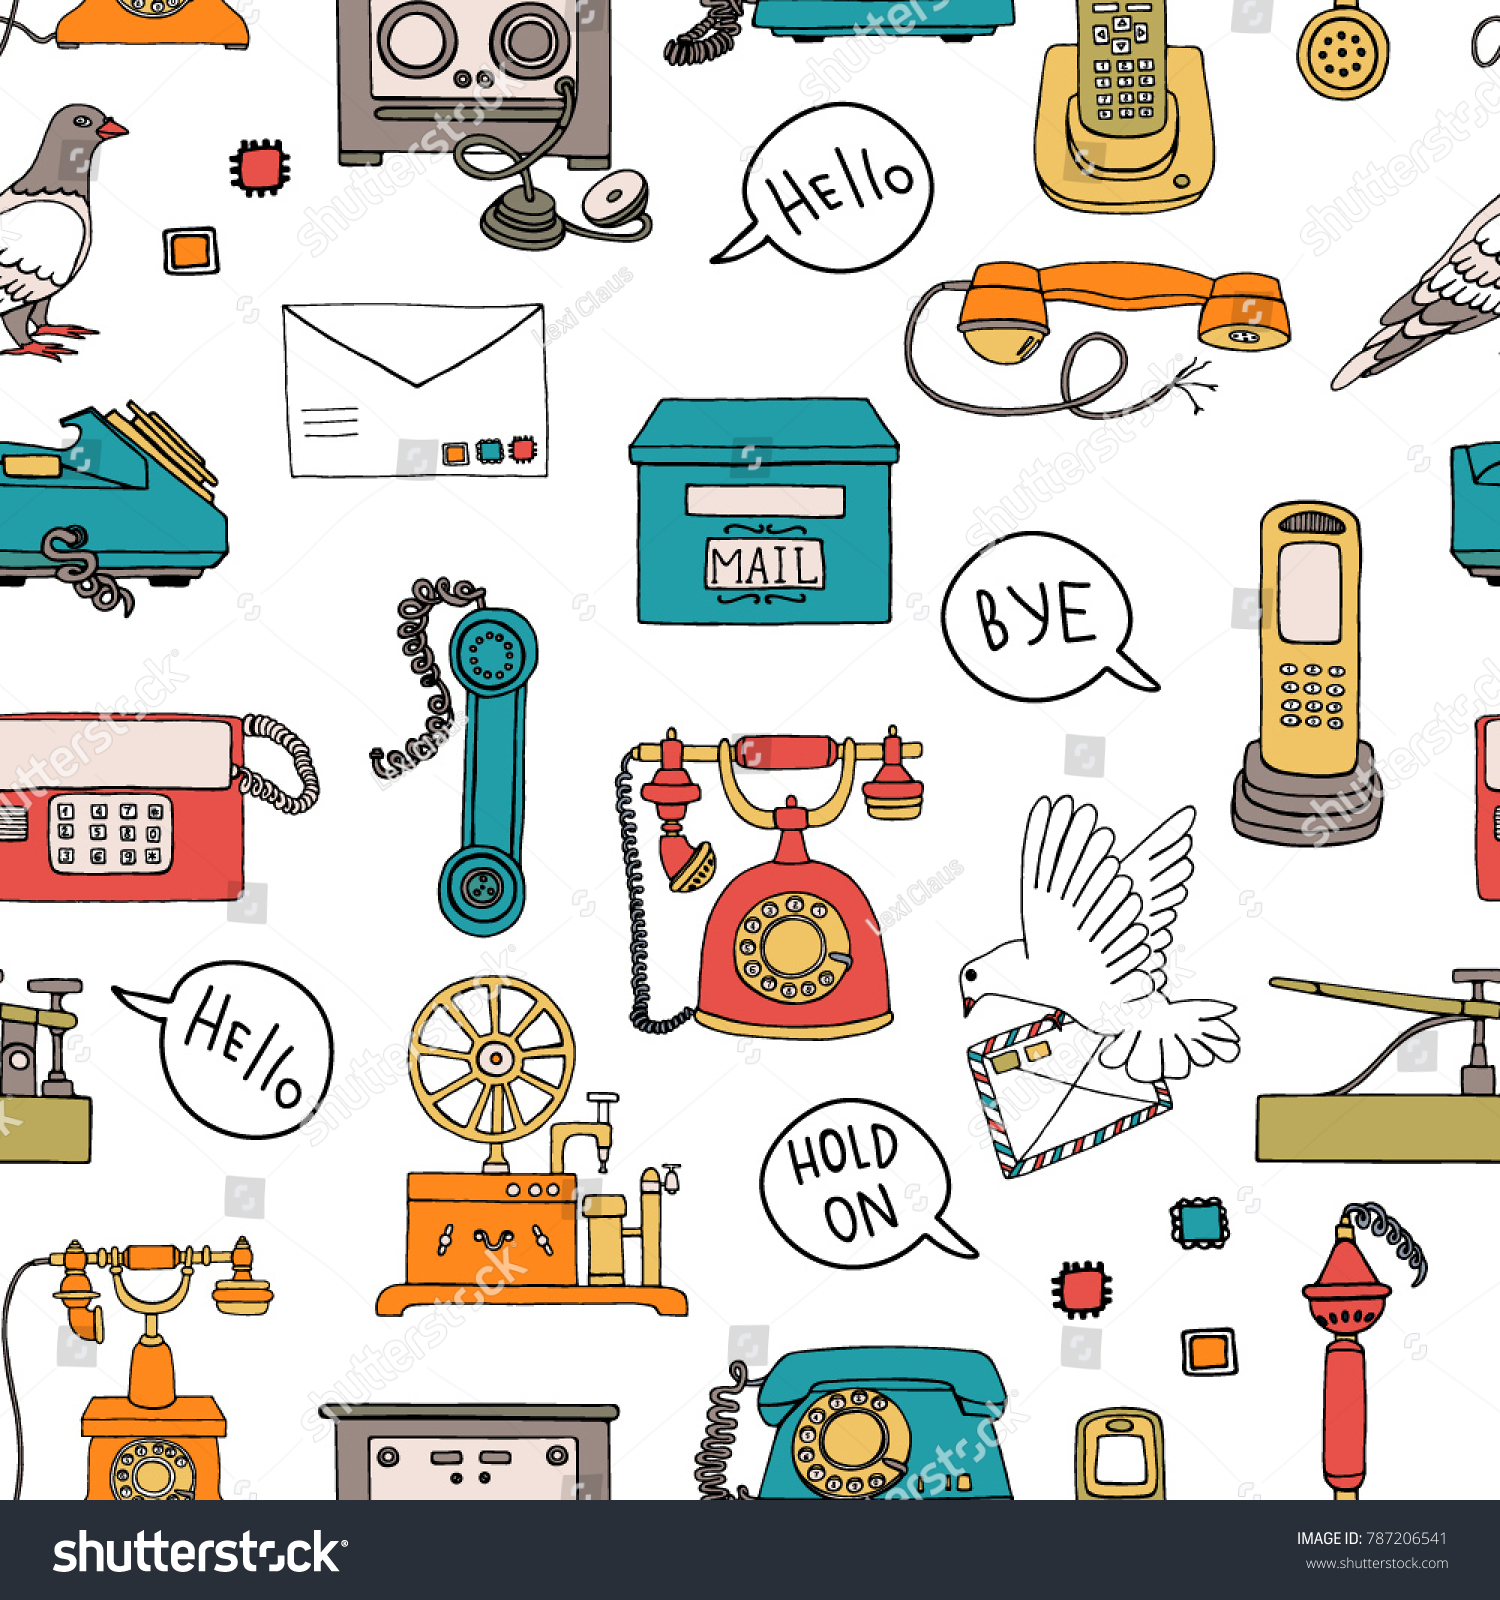 Vector seamless pattern of vintage means of munication Retro repeat backdrop with wired rotary dial